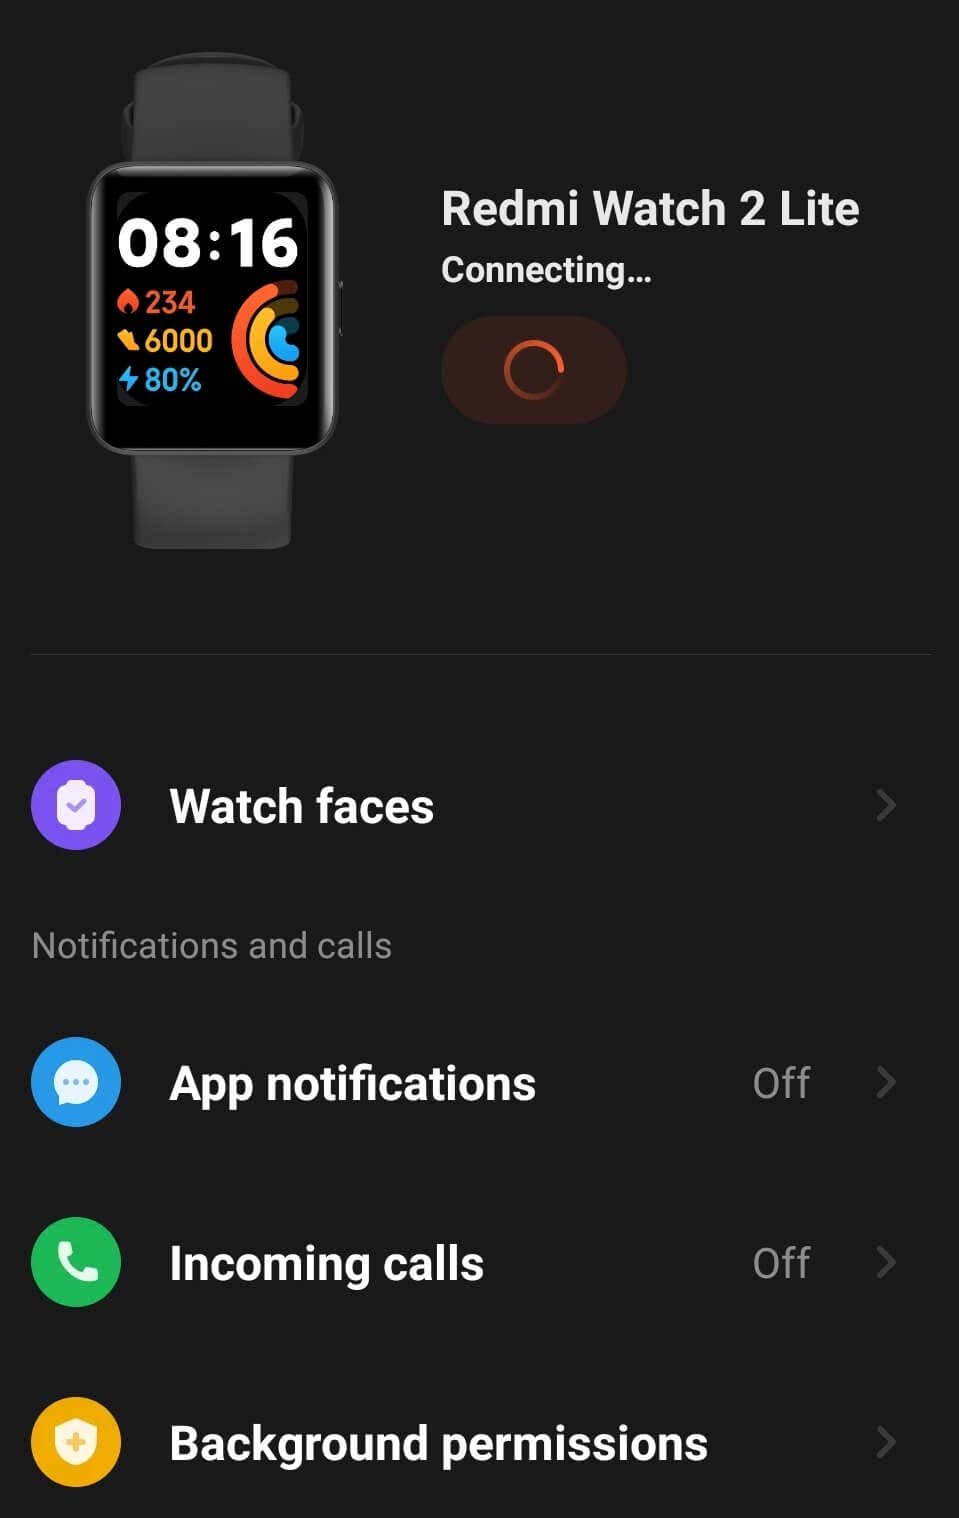 Redmi Watch 2 Lite: Here are some FAQs answered